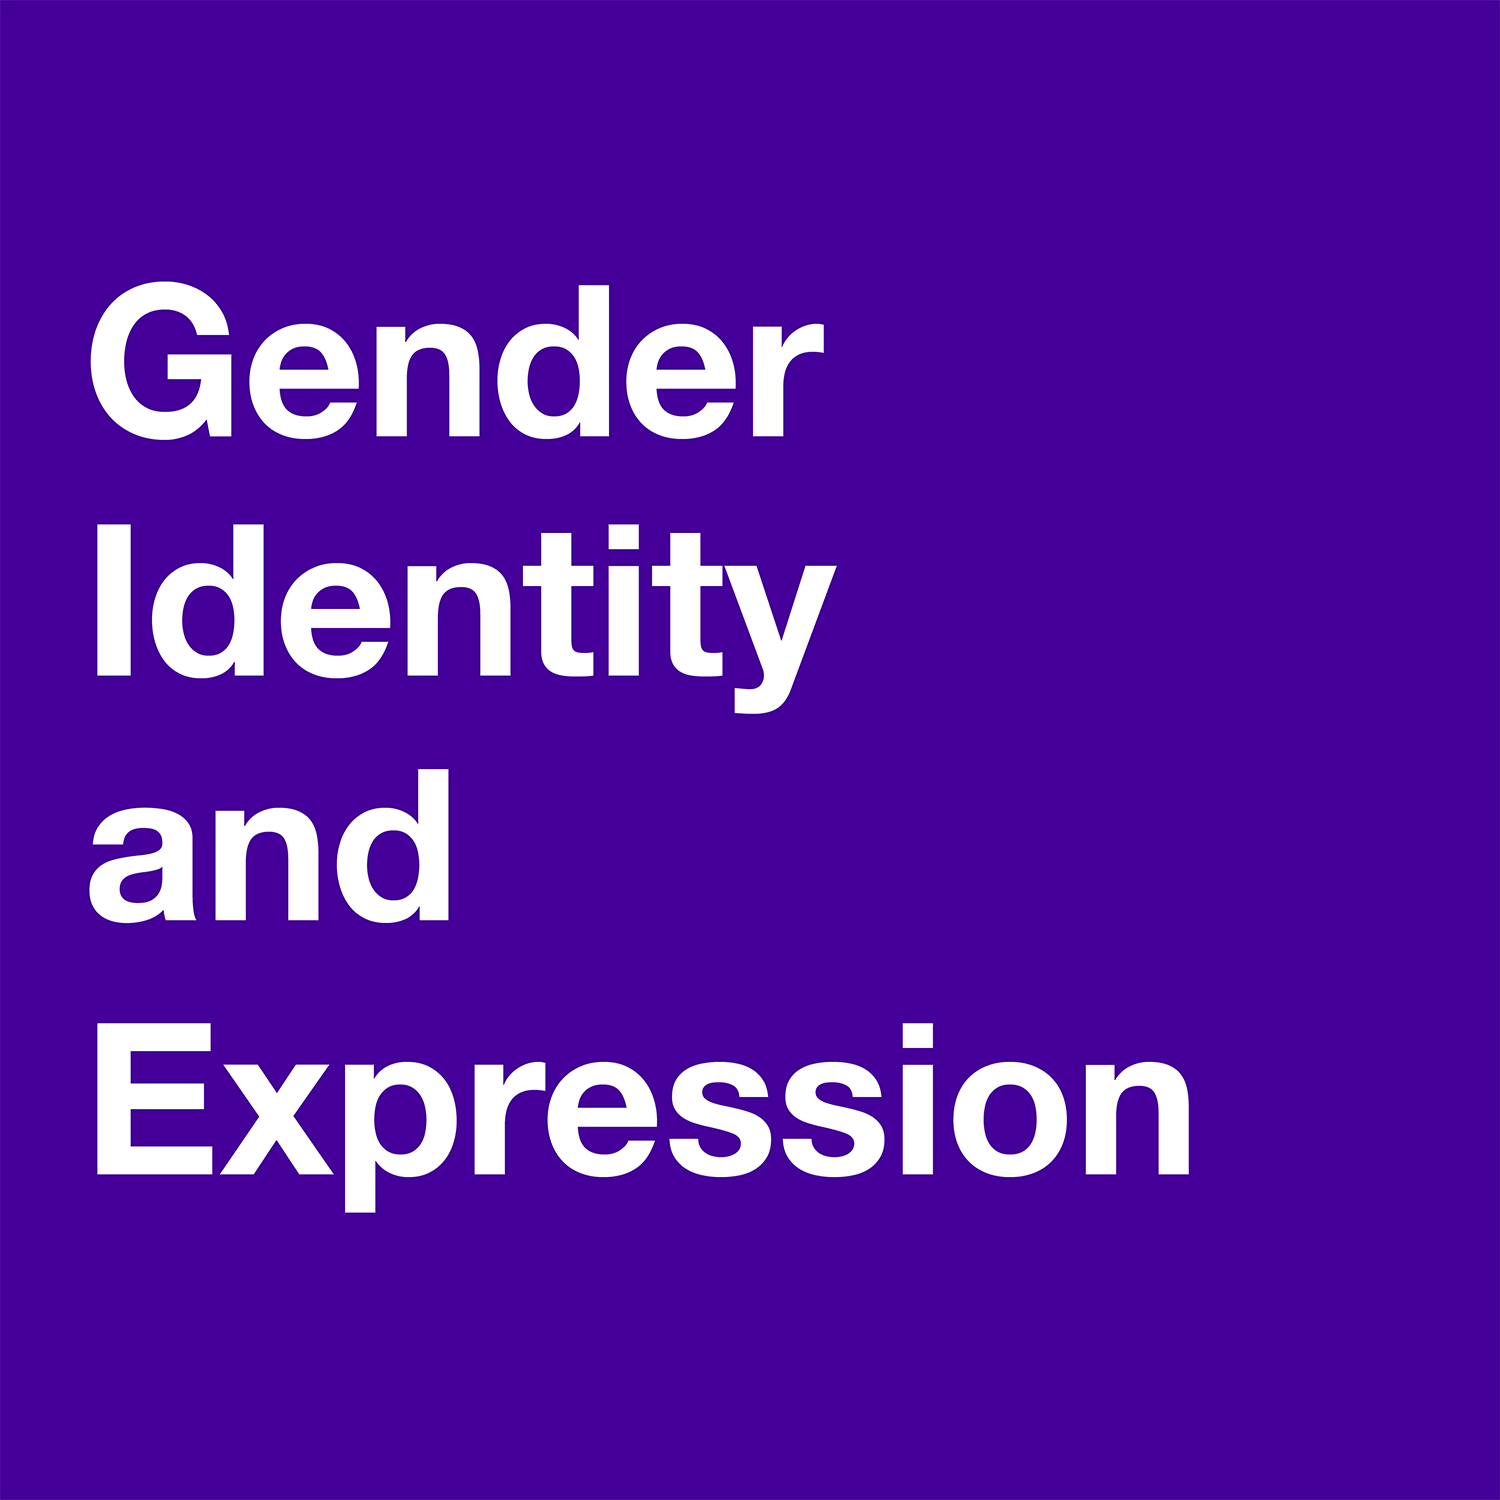  Gender Identity and Expression Definition 